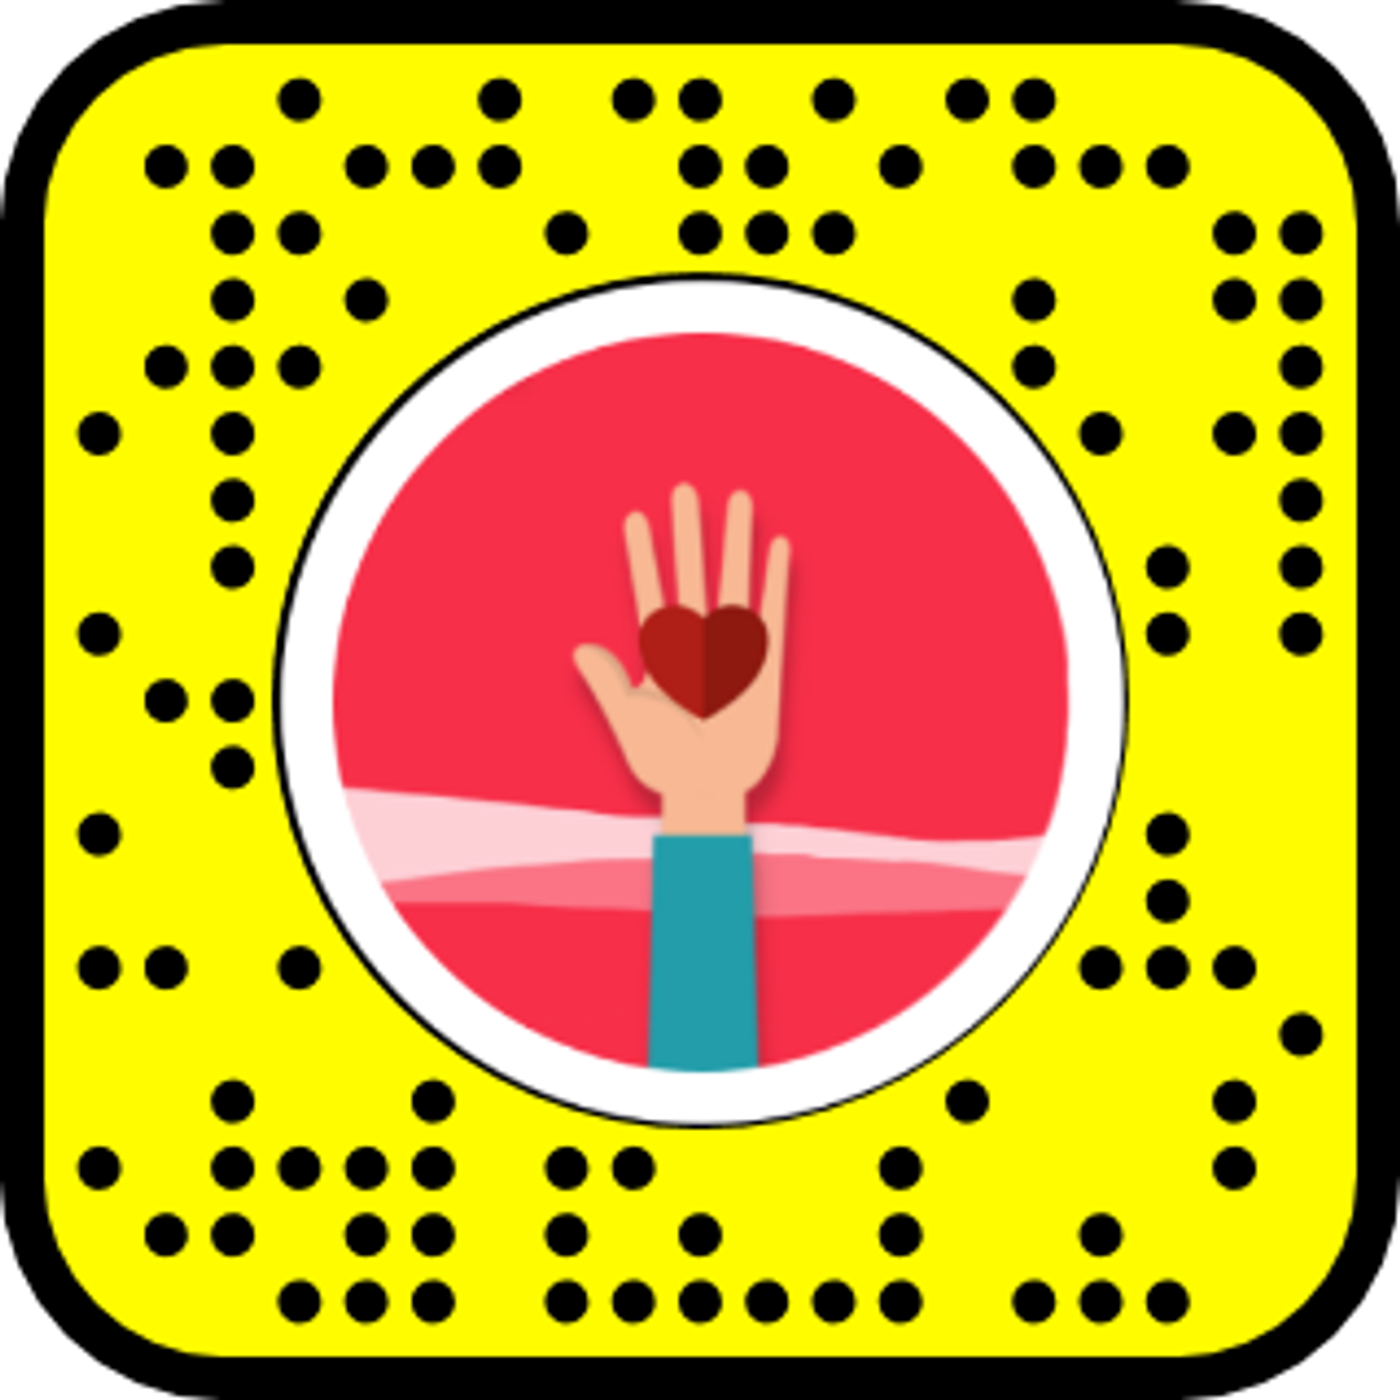 Ep 317: The Lucy Rayner Foundation and their new Snapchat lens